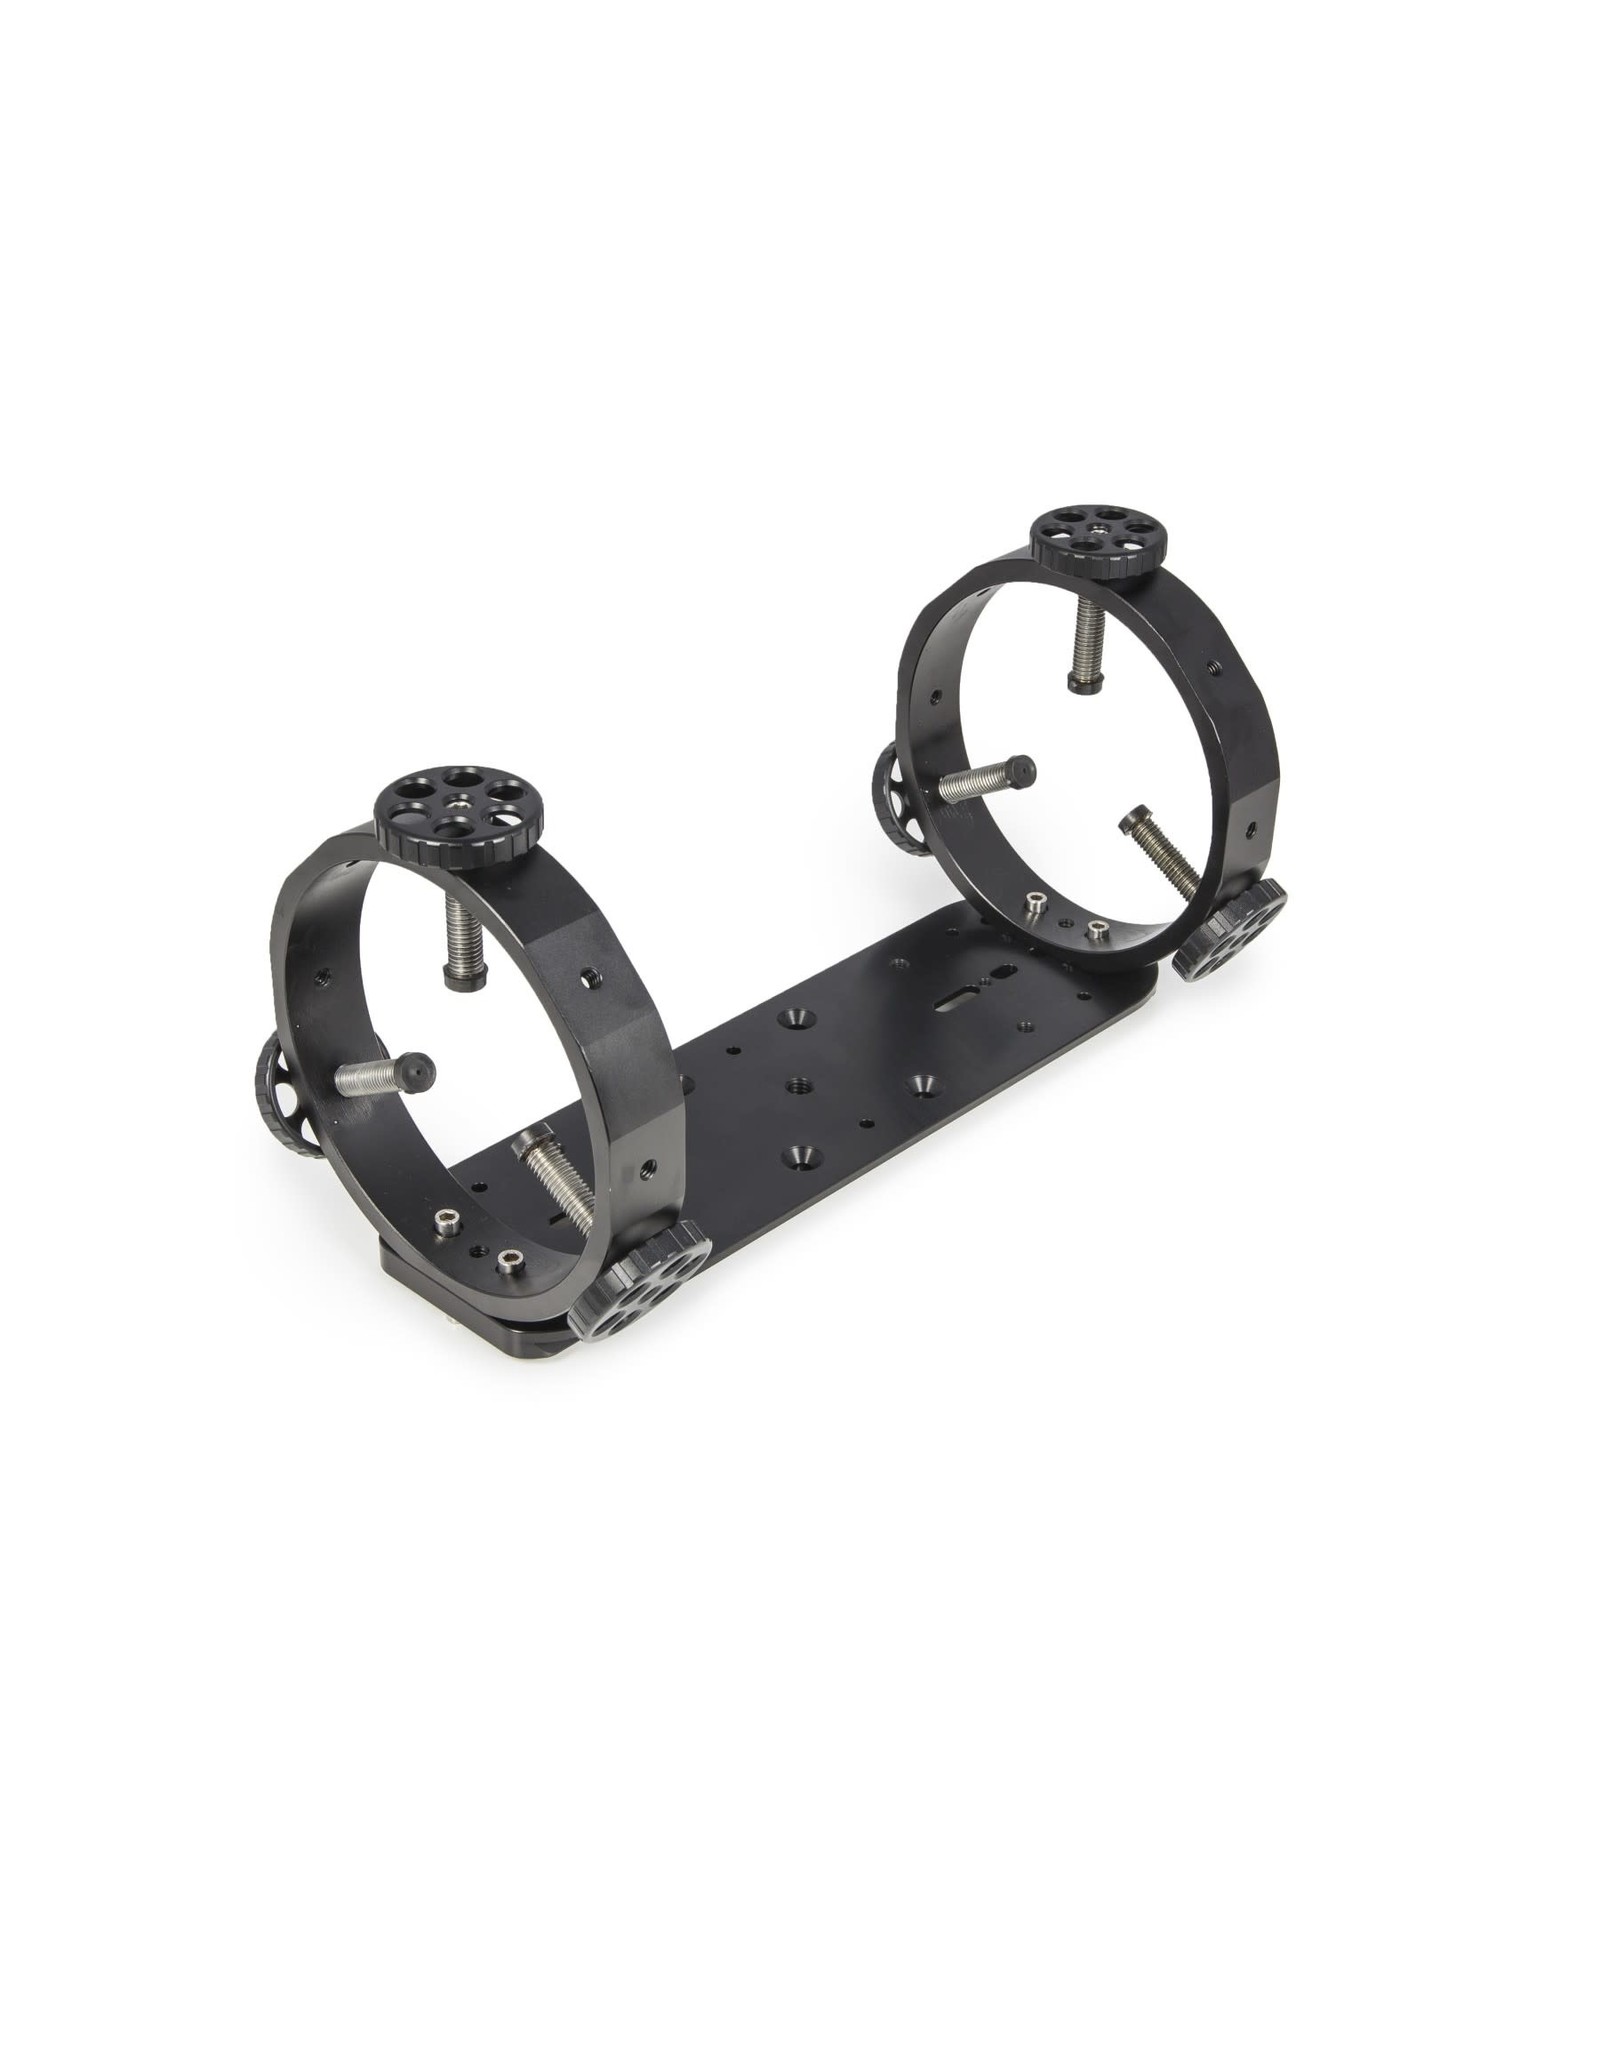 Baader Planetarium Baader double mounting plate and holder for guidescope rings (I & II), 300mm with 3" dovetail